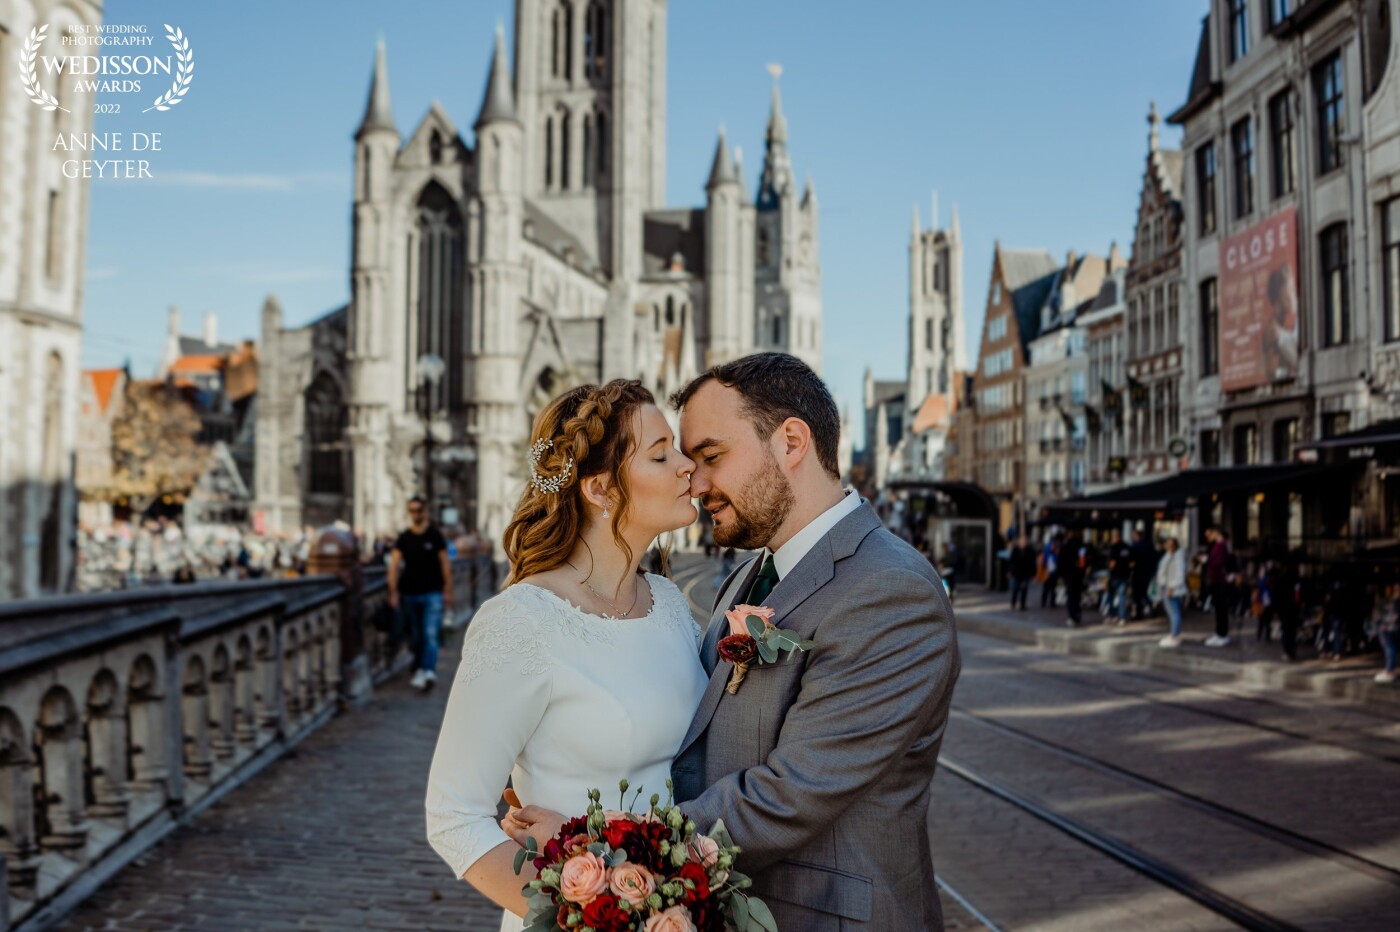 Kriszti and Steven choose Ghent as the perfect scenery for their wedding shoot.<br />
The tree towers in the back are typical for Ghent. Most beautiful is the way they seem to stand still in the busy city life. The way she kissed him, perfect moment